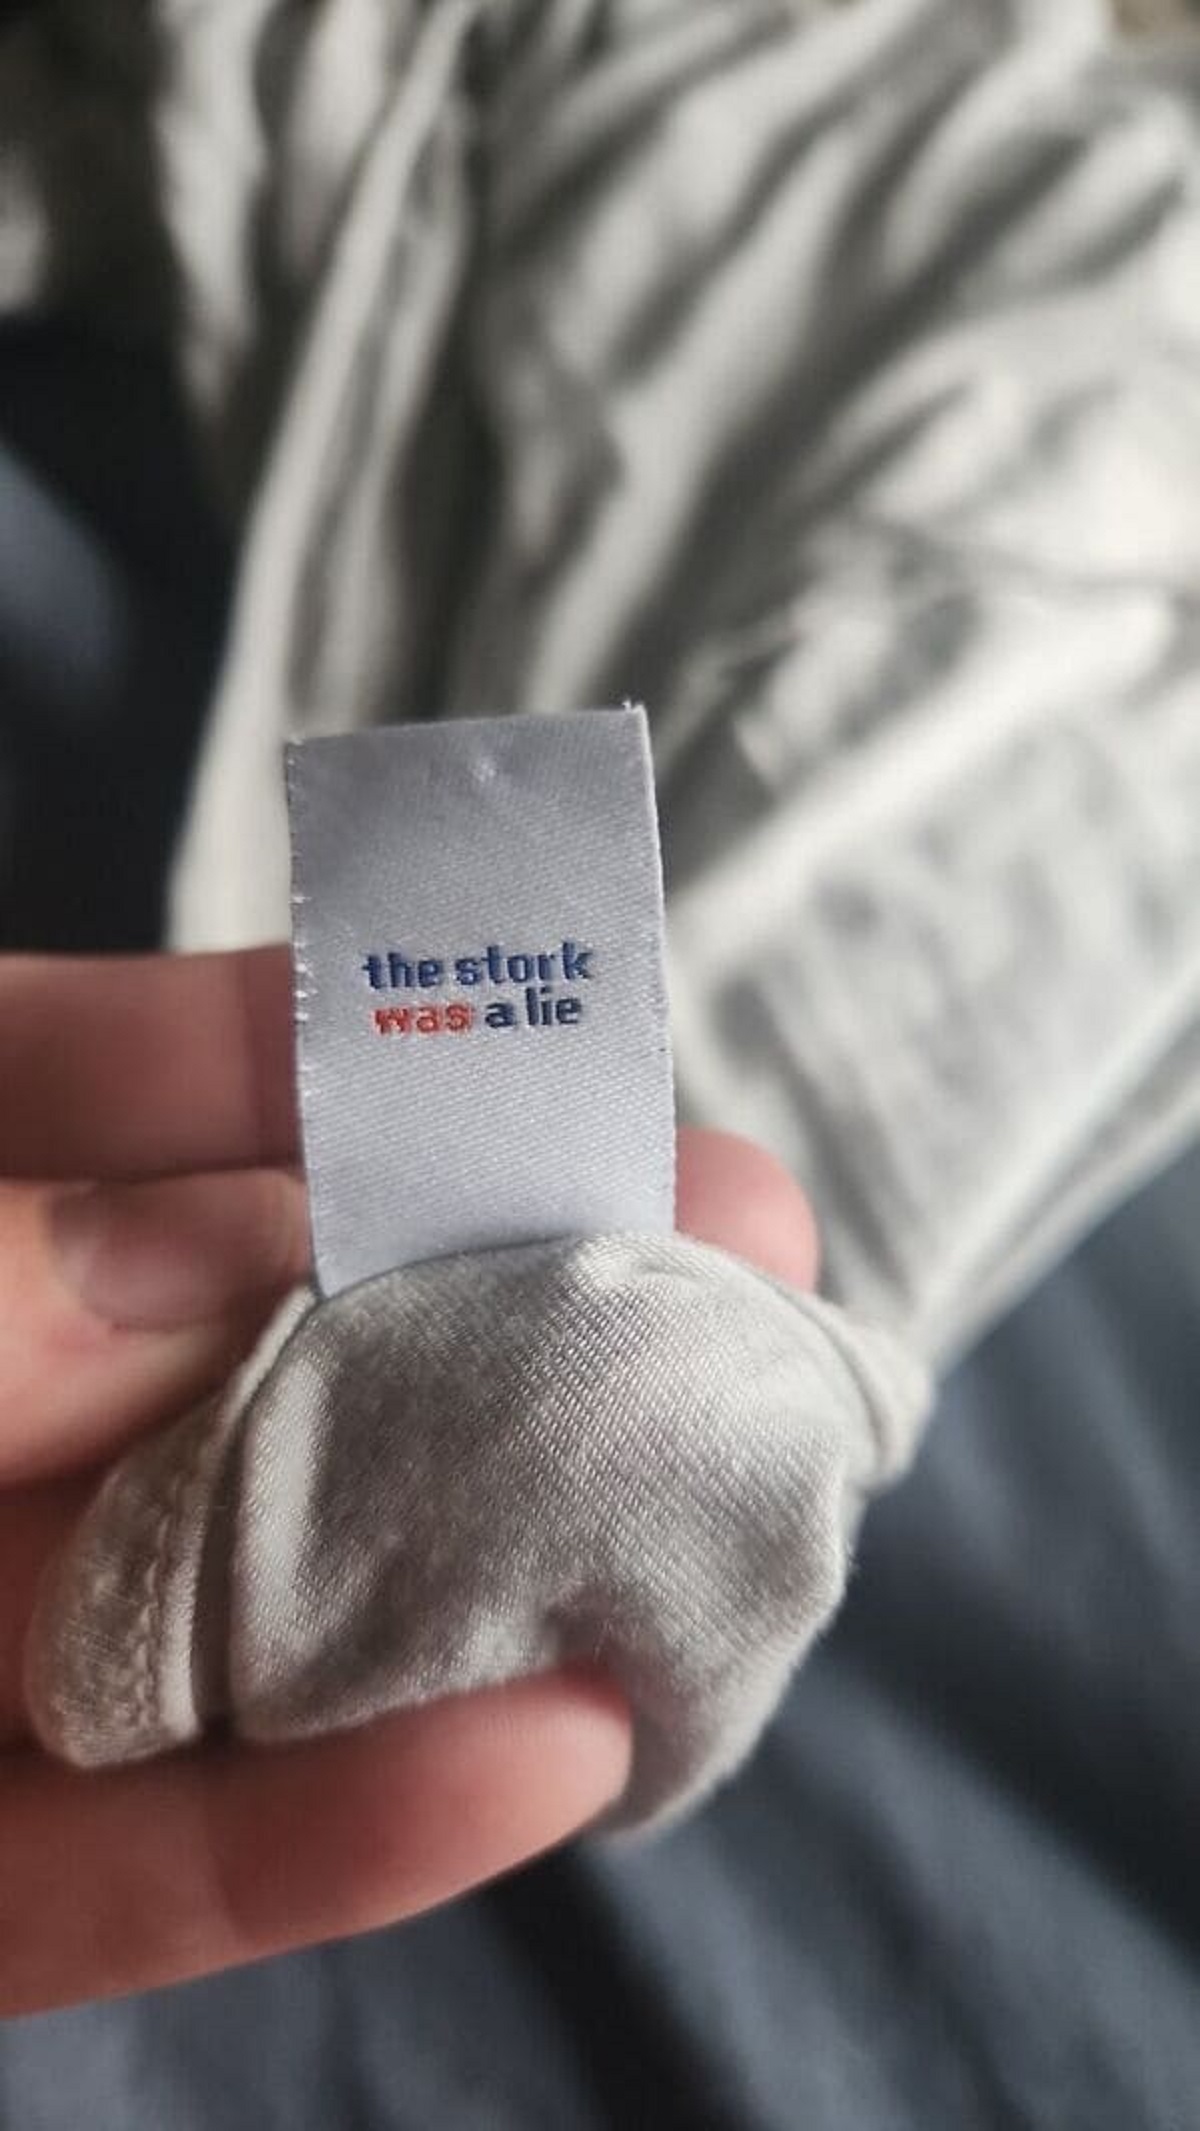 “On The Inside Tag Of A Maternity Shirt.. The Stork Was A Lie”